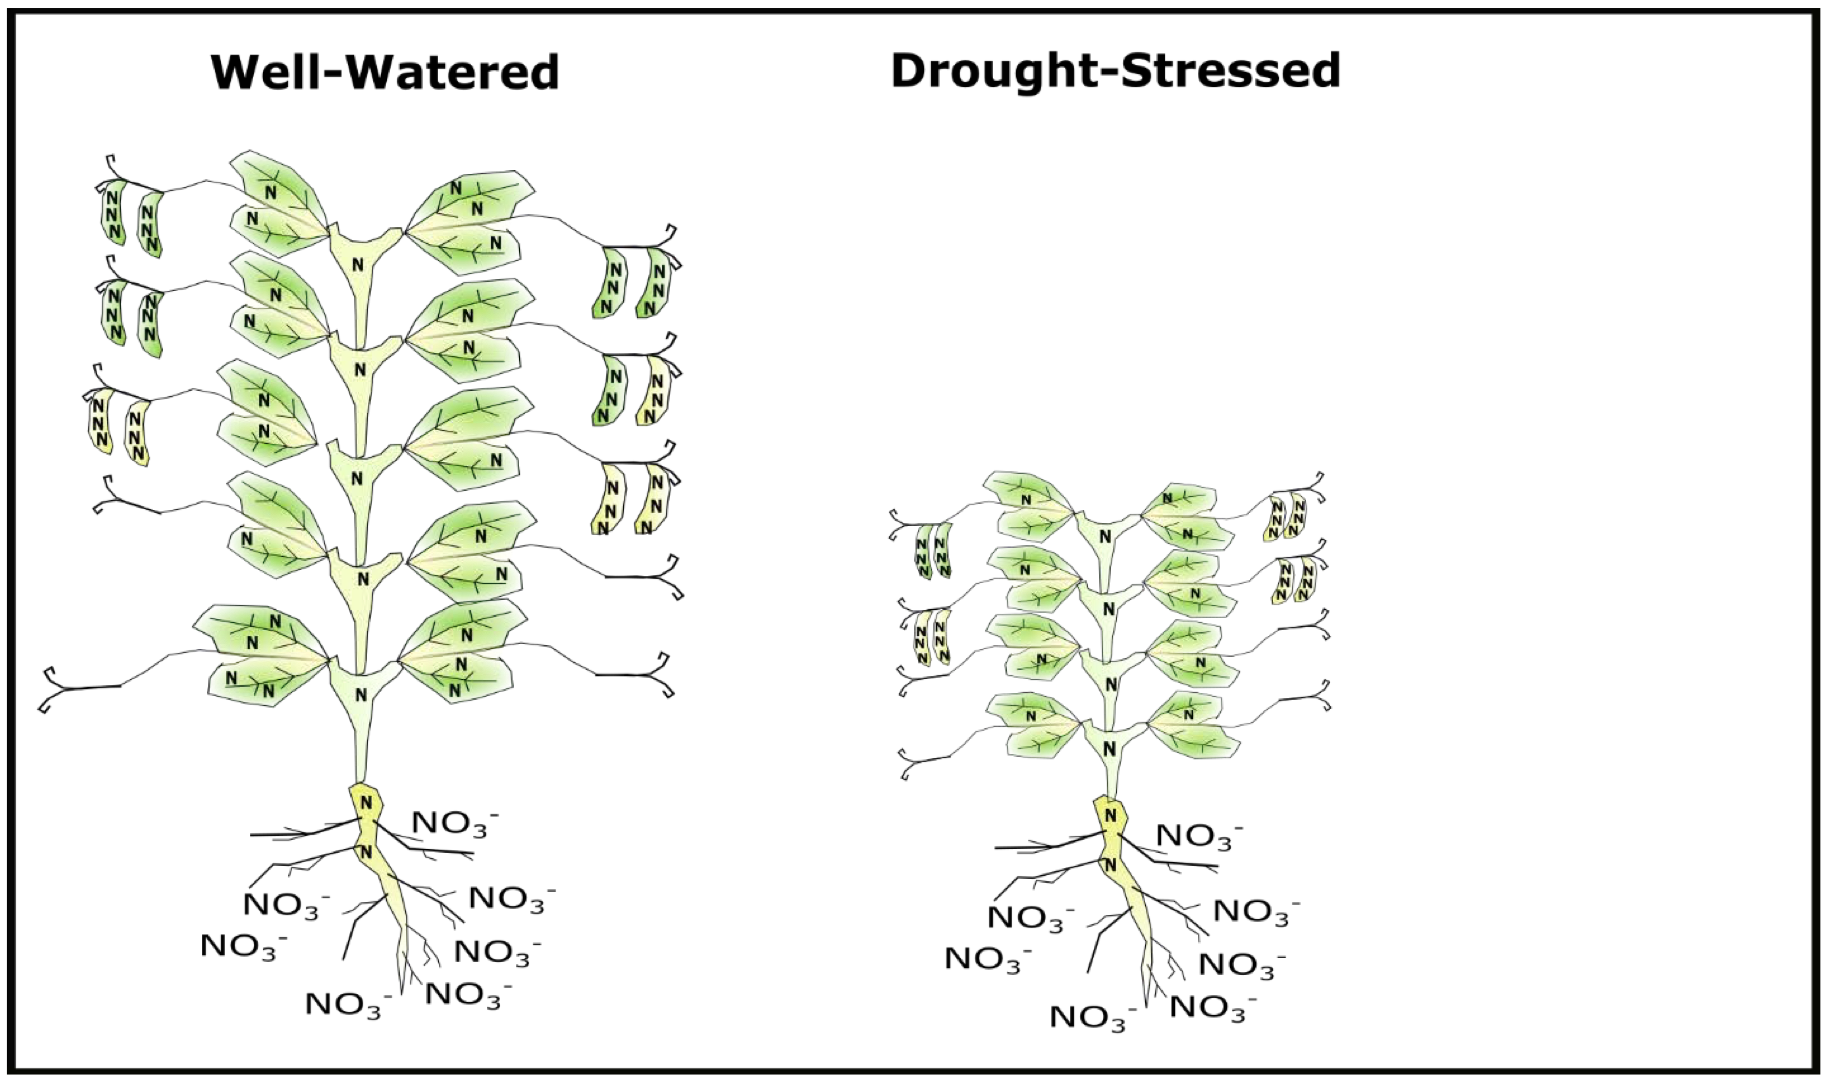 Compared to a well-watered plant, drought stress reduces biomass and seed number. Less biomass has potential to decrease protein since less N will be remobilized to the seed during pod-fill. Conversely fewer seeds may increase protein content on a per-seed basis.